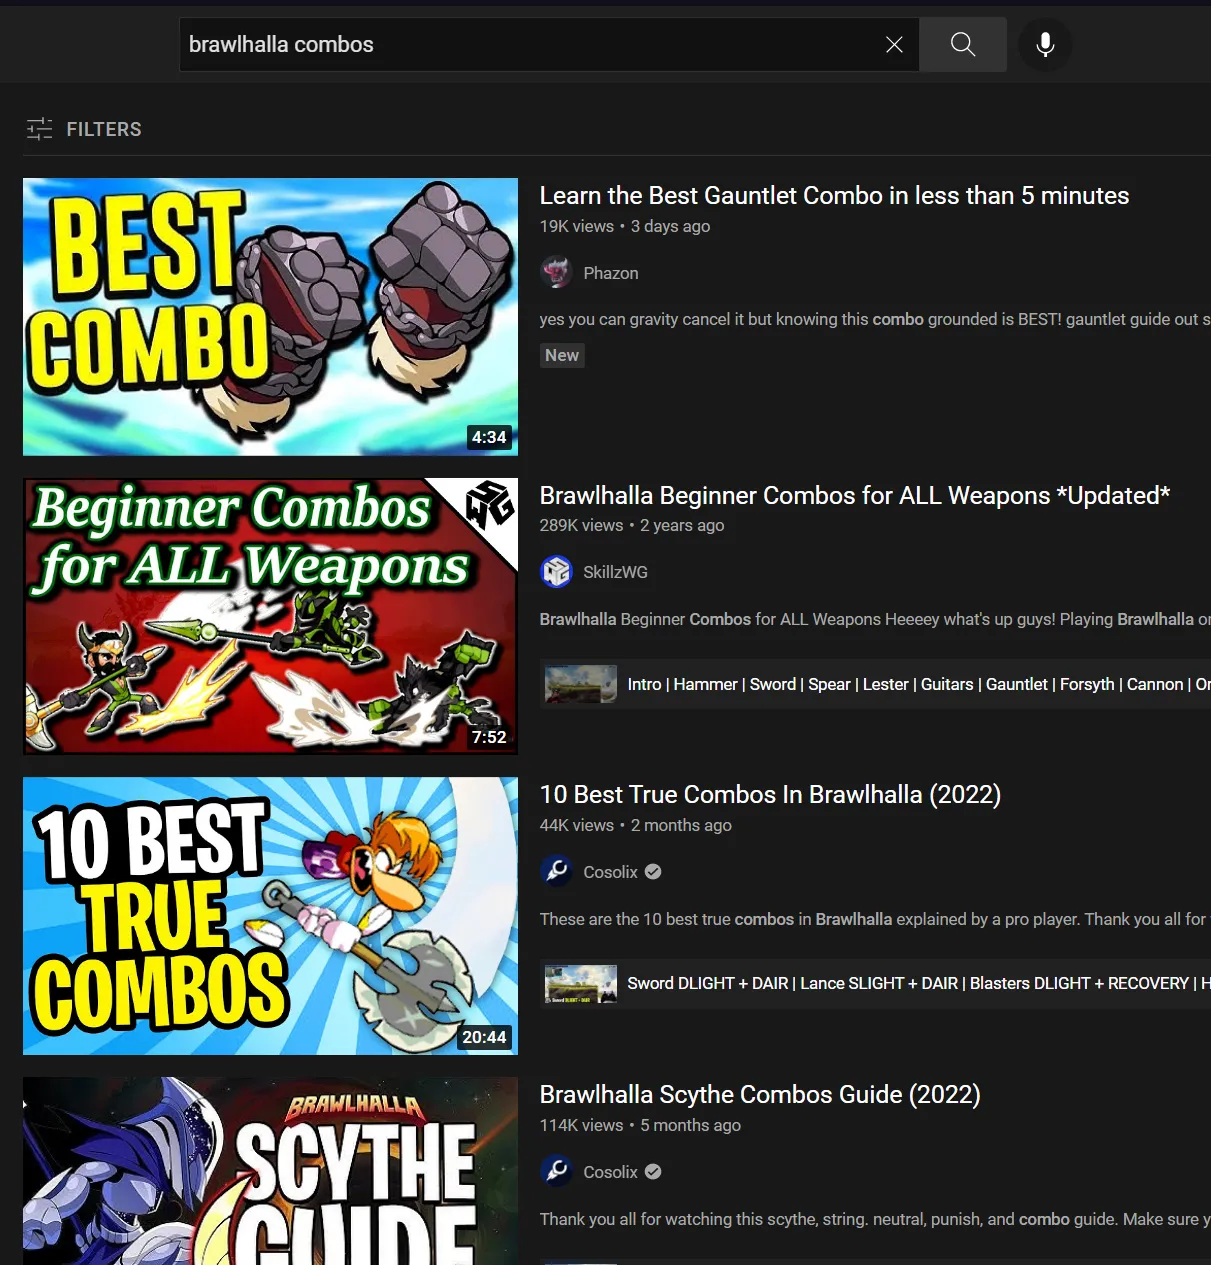 YouTube search for 'Brawlhalla Combos'